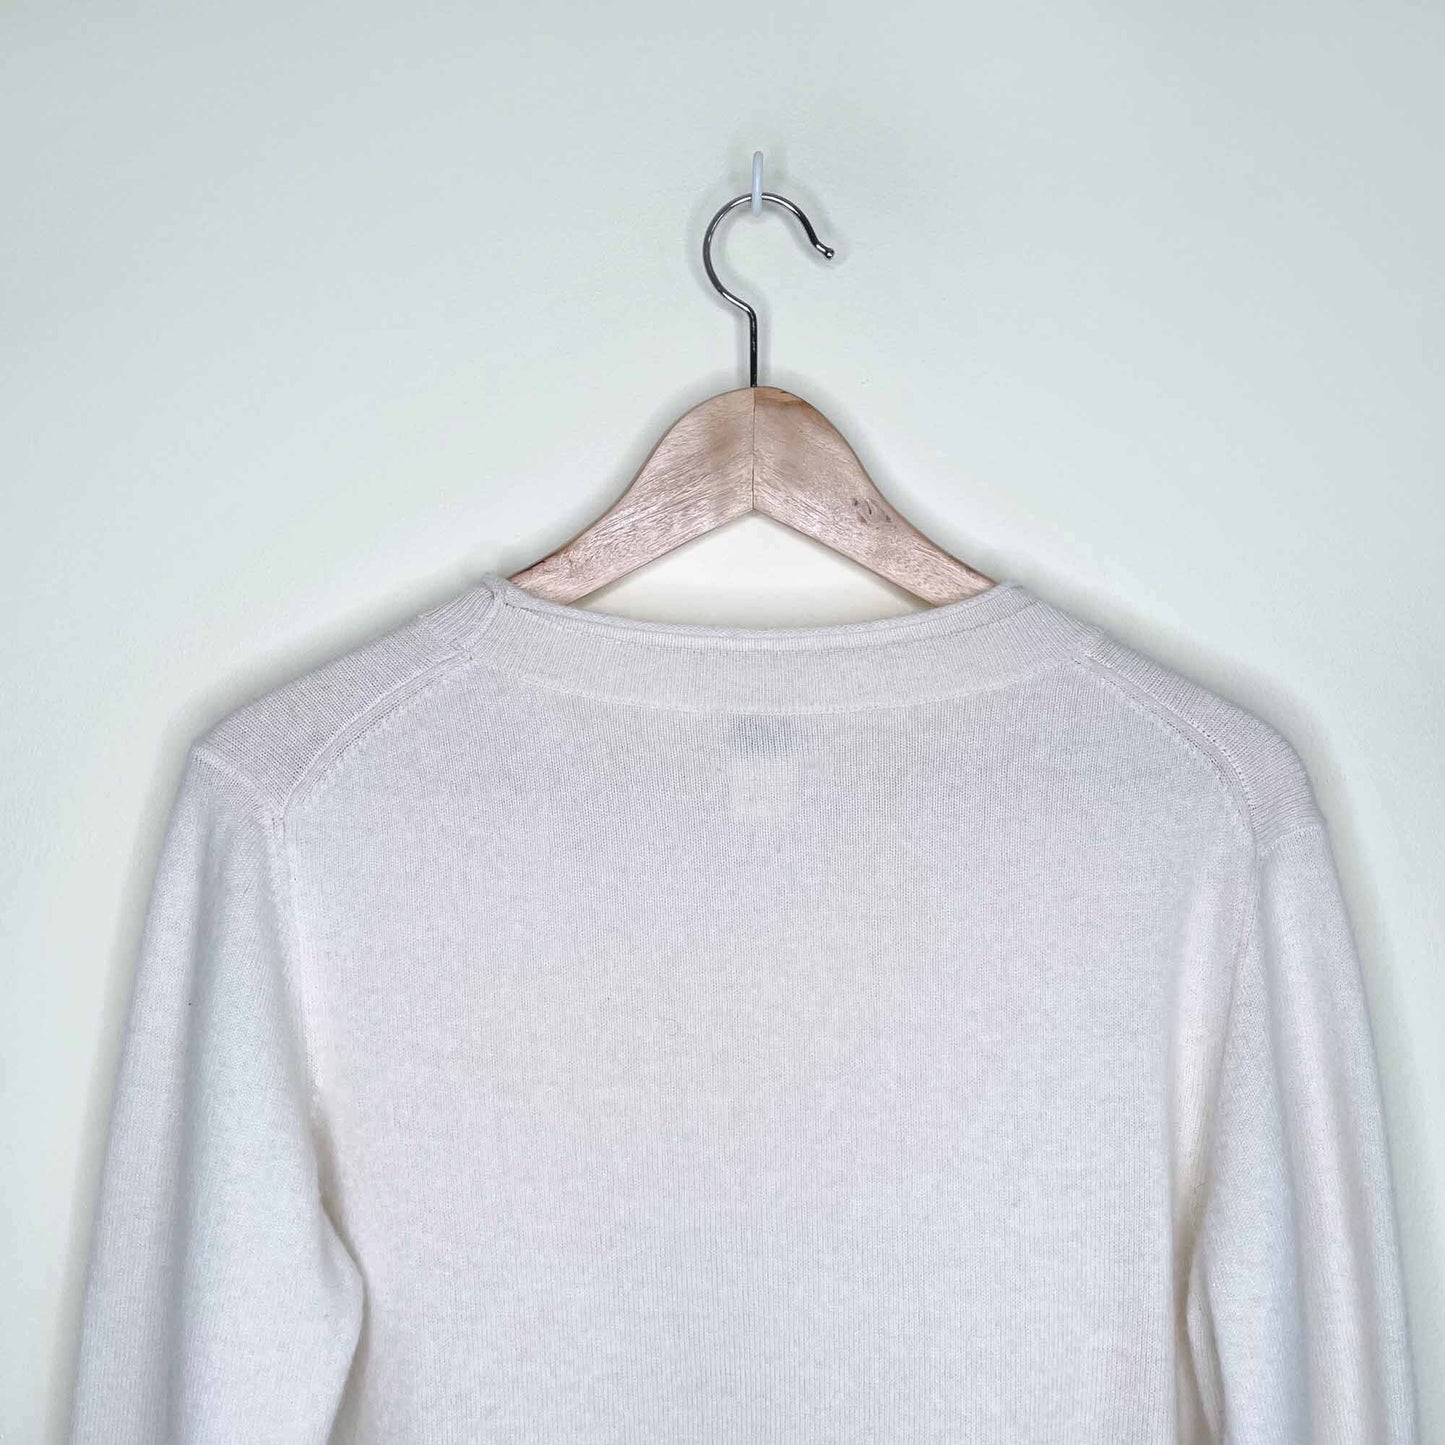 mag by magaschino 100% cashmere sweater - size medium